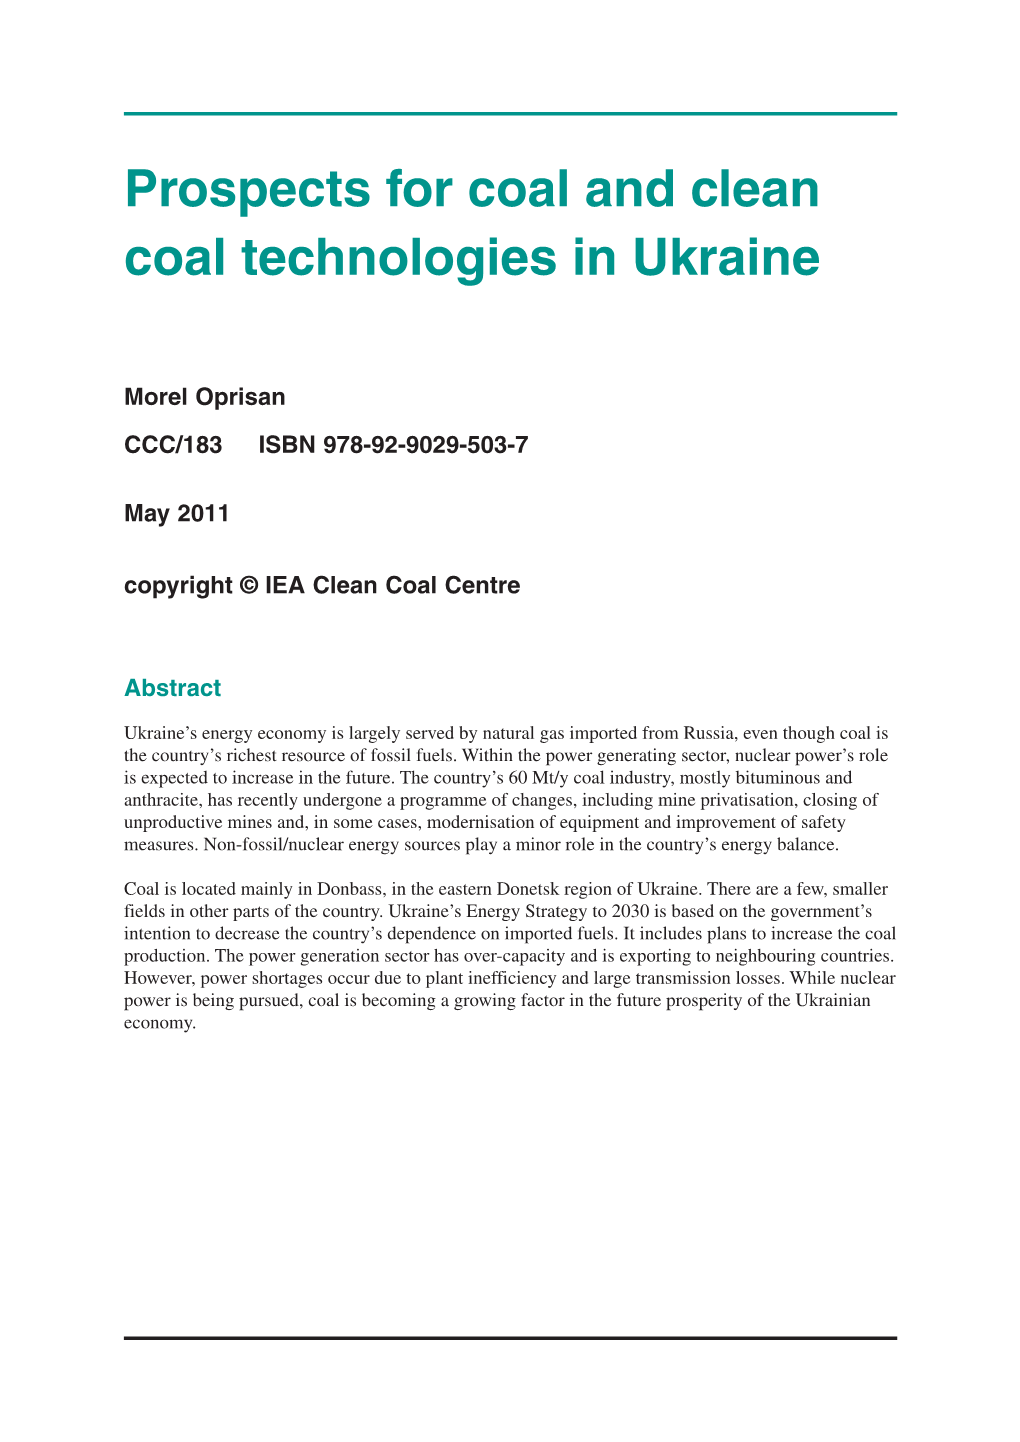 Prospects for Coal and Clean Coal Technologies in Ukraine